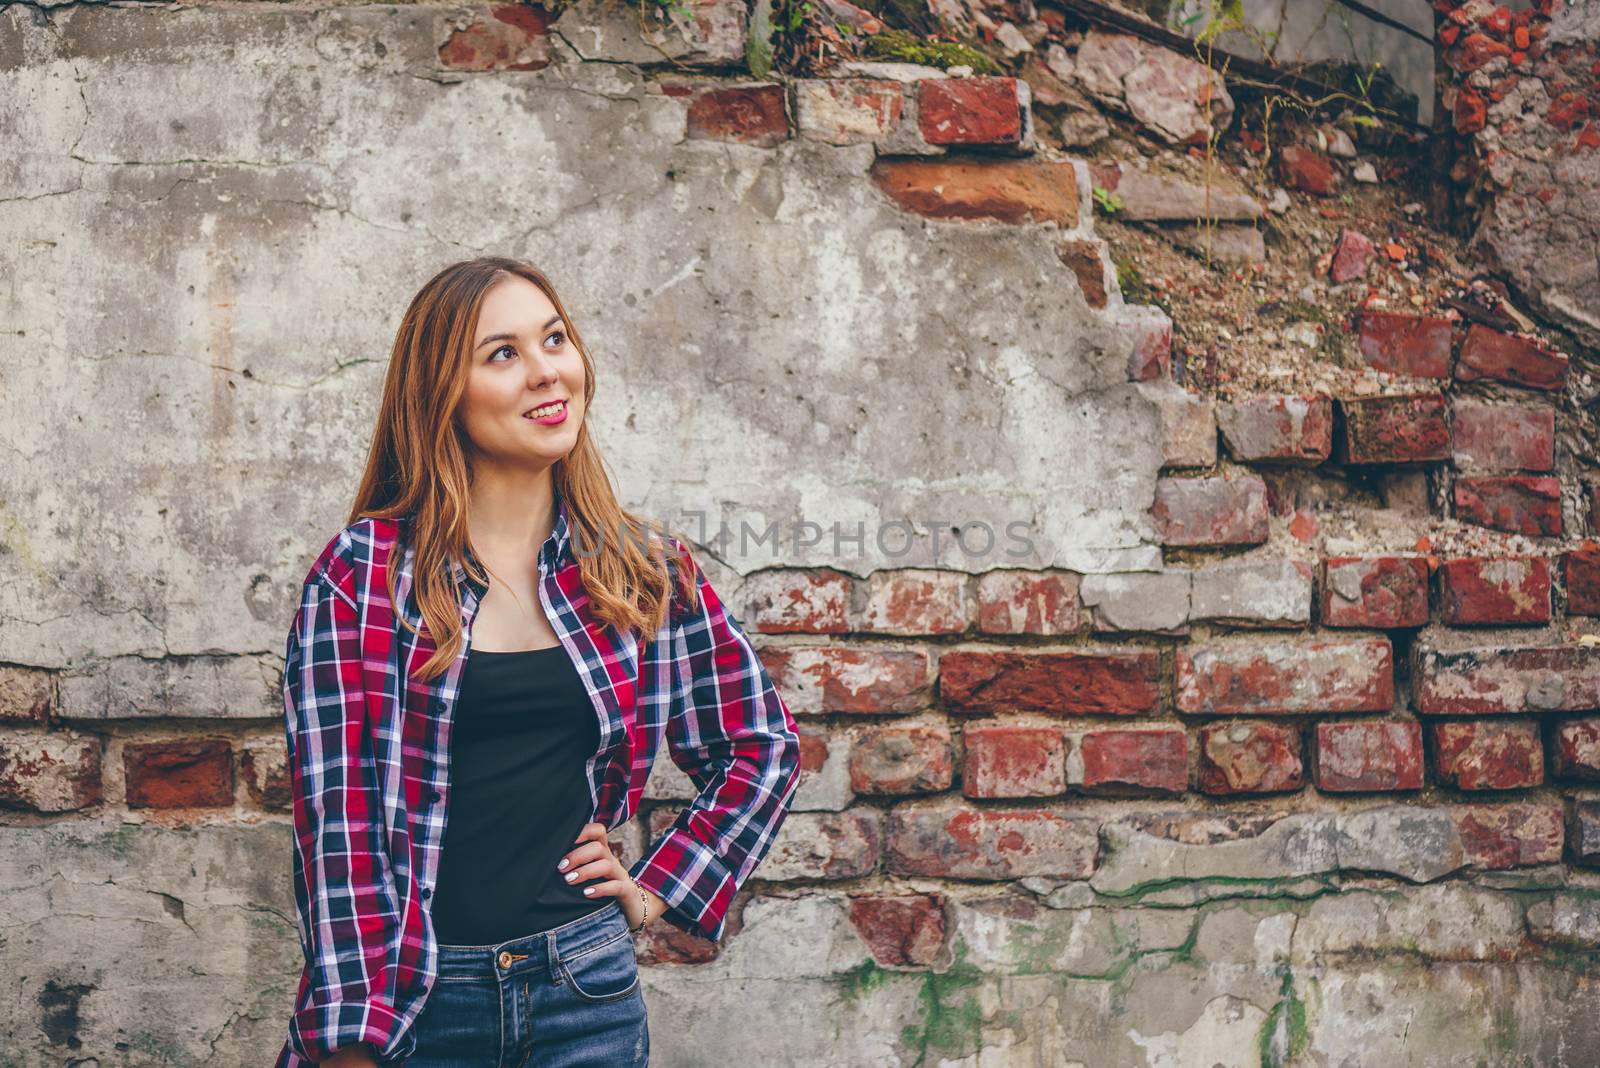 Young beautiful woman is smiling while standing in front of brick wall